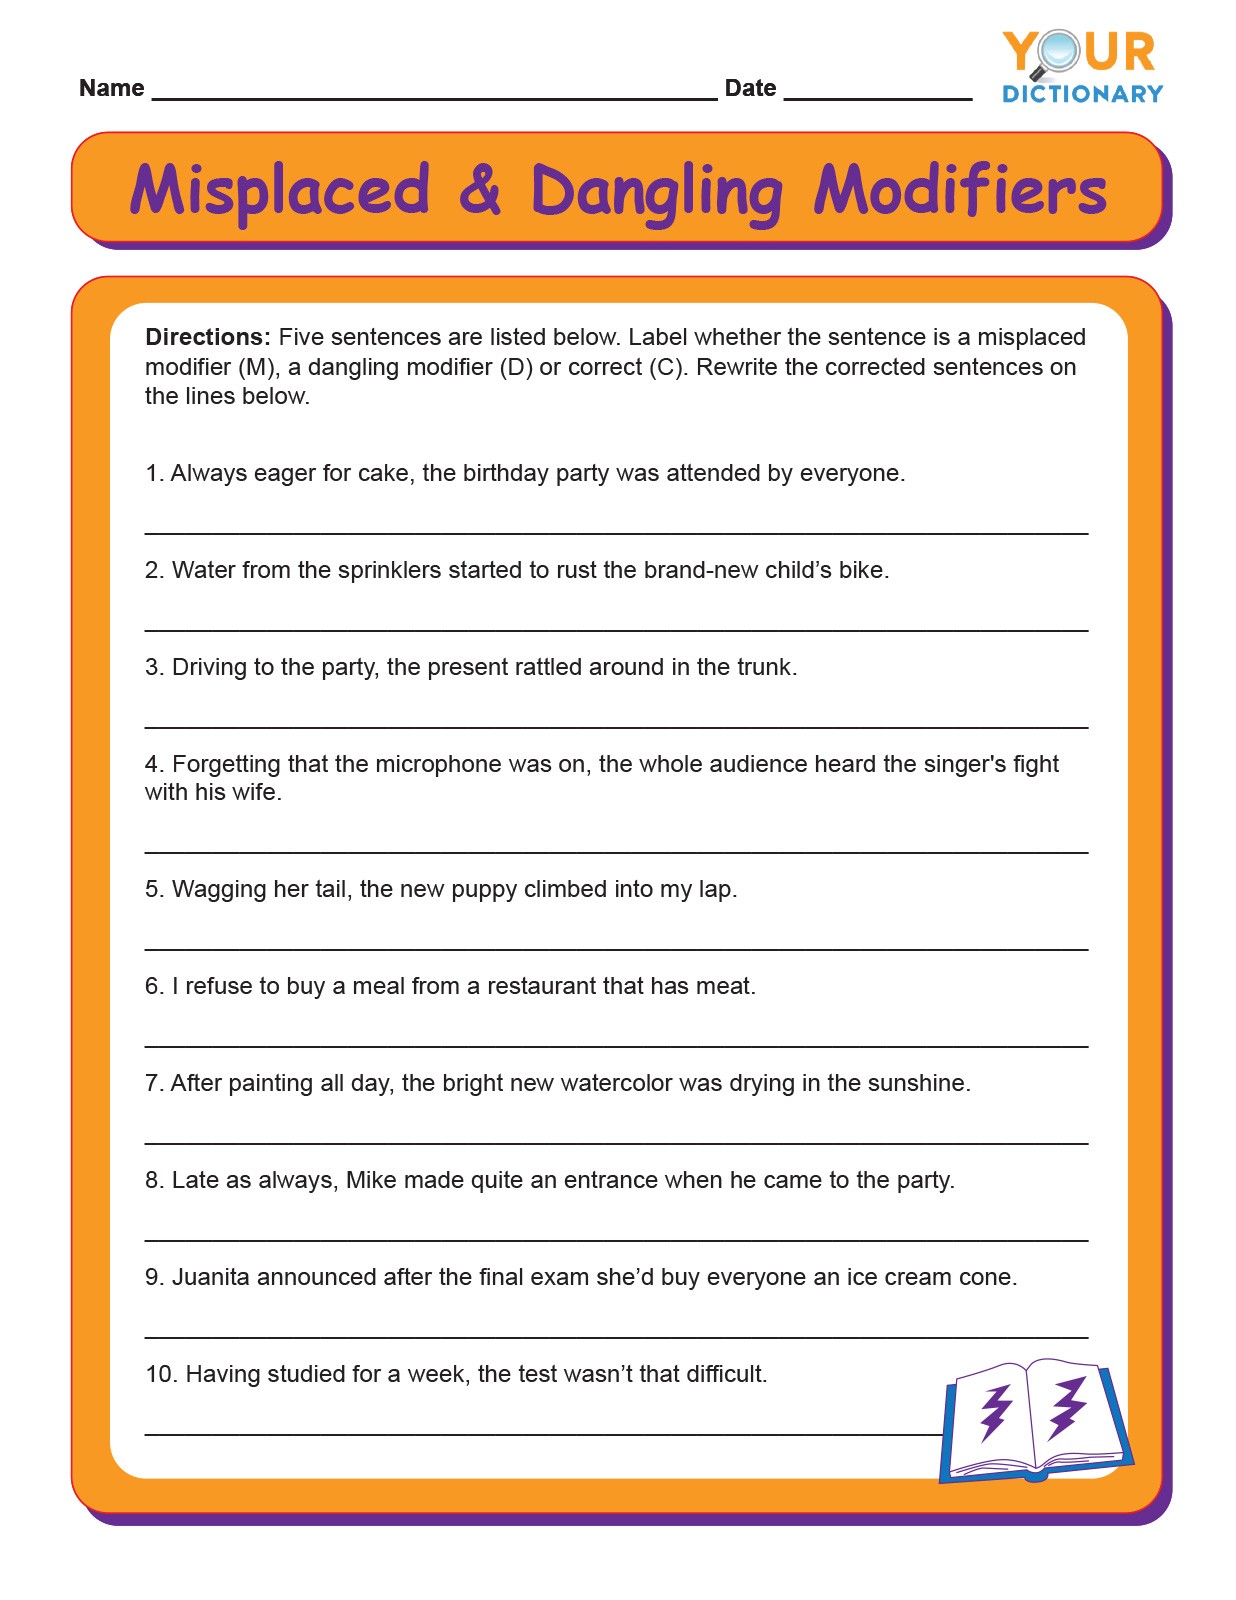 misplaced-and-dangling-modifiers-worksheet